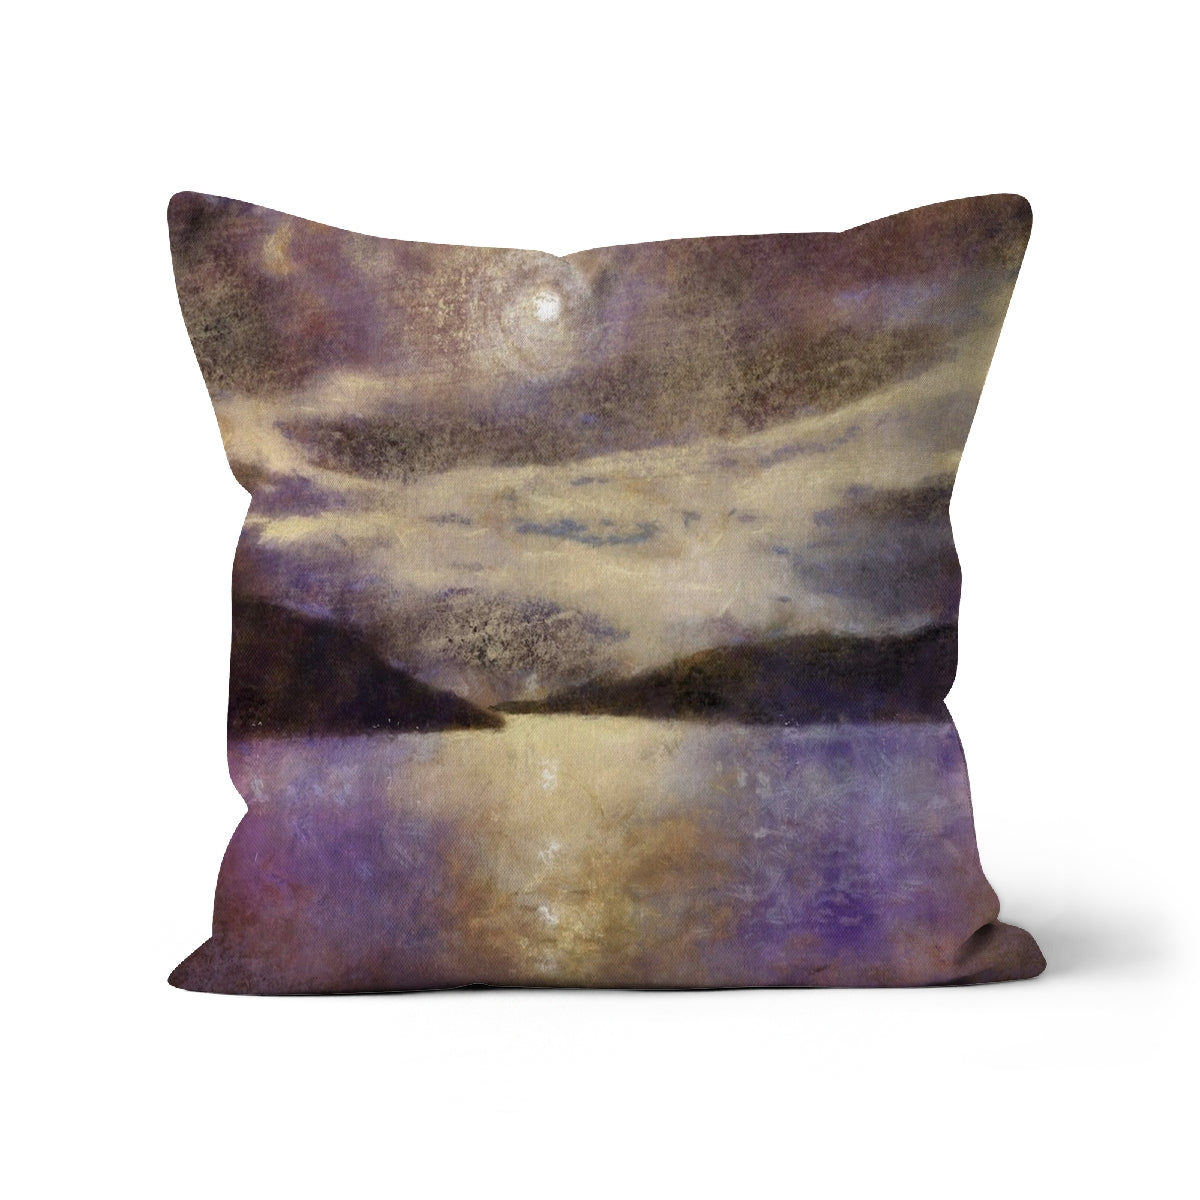 Moonlight Meets Lewis & Harris Art Gifts Cushion-Cushions-Hebridean Islands Art Gallery-Canvas-24"x24"-Paintings, Prints, Homeware, Art Gifts From Scotland By Scottish Artist Kevin Hunter